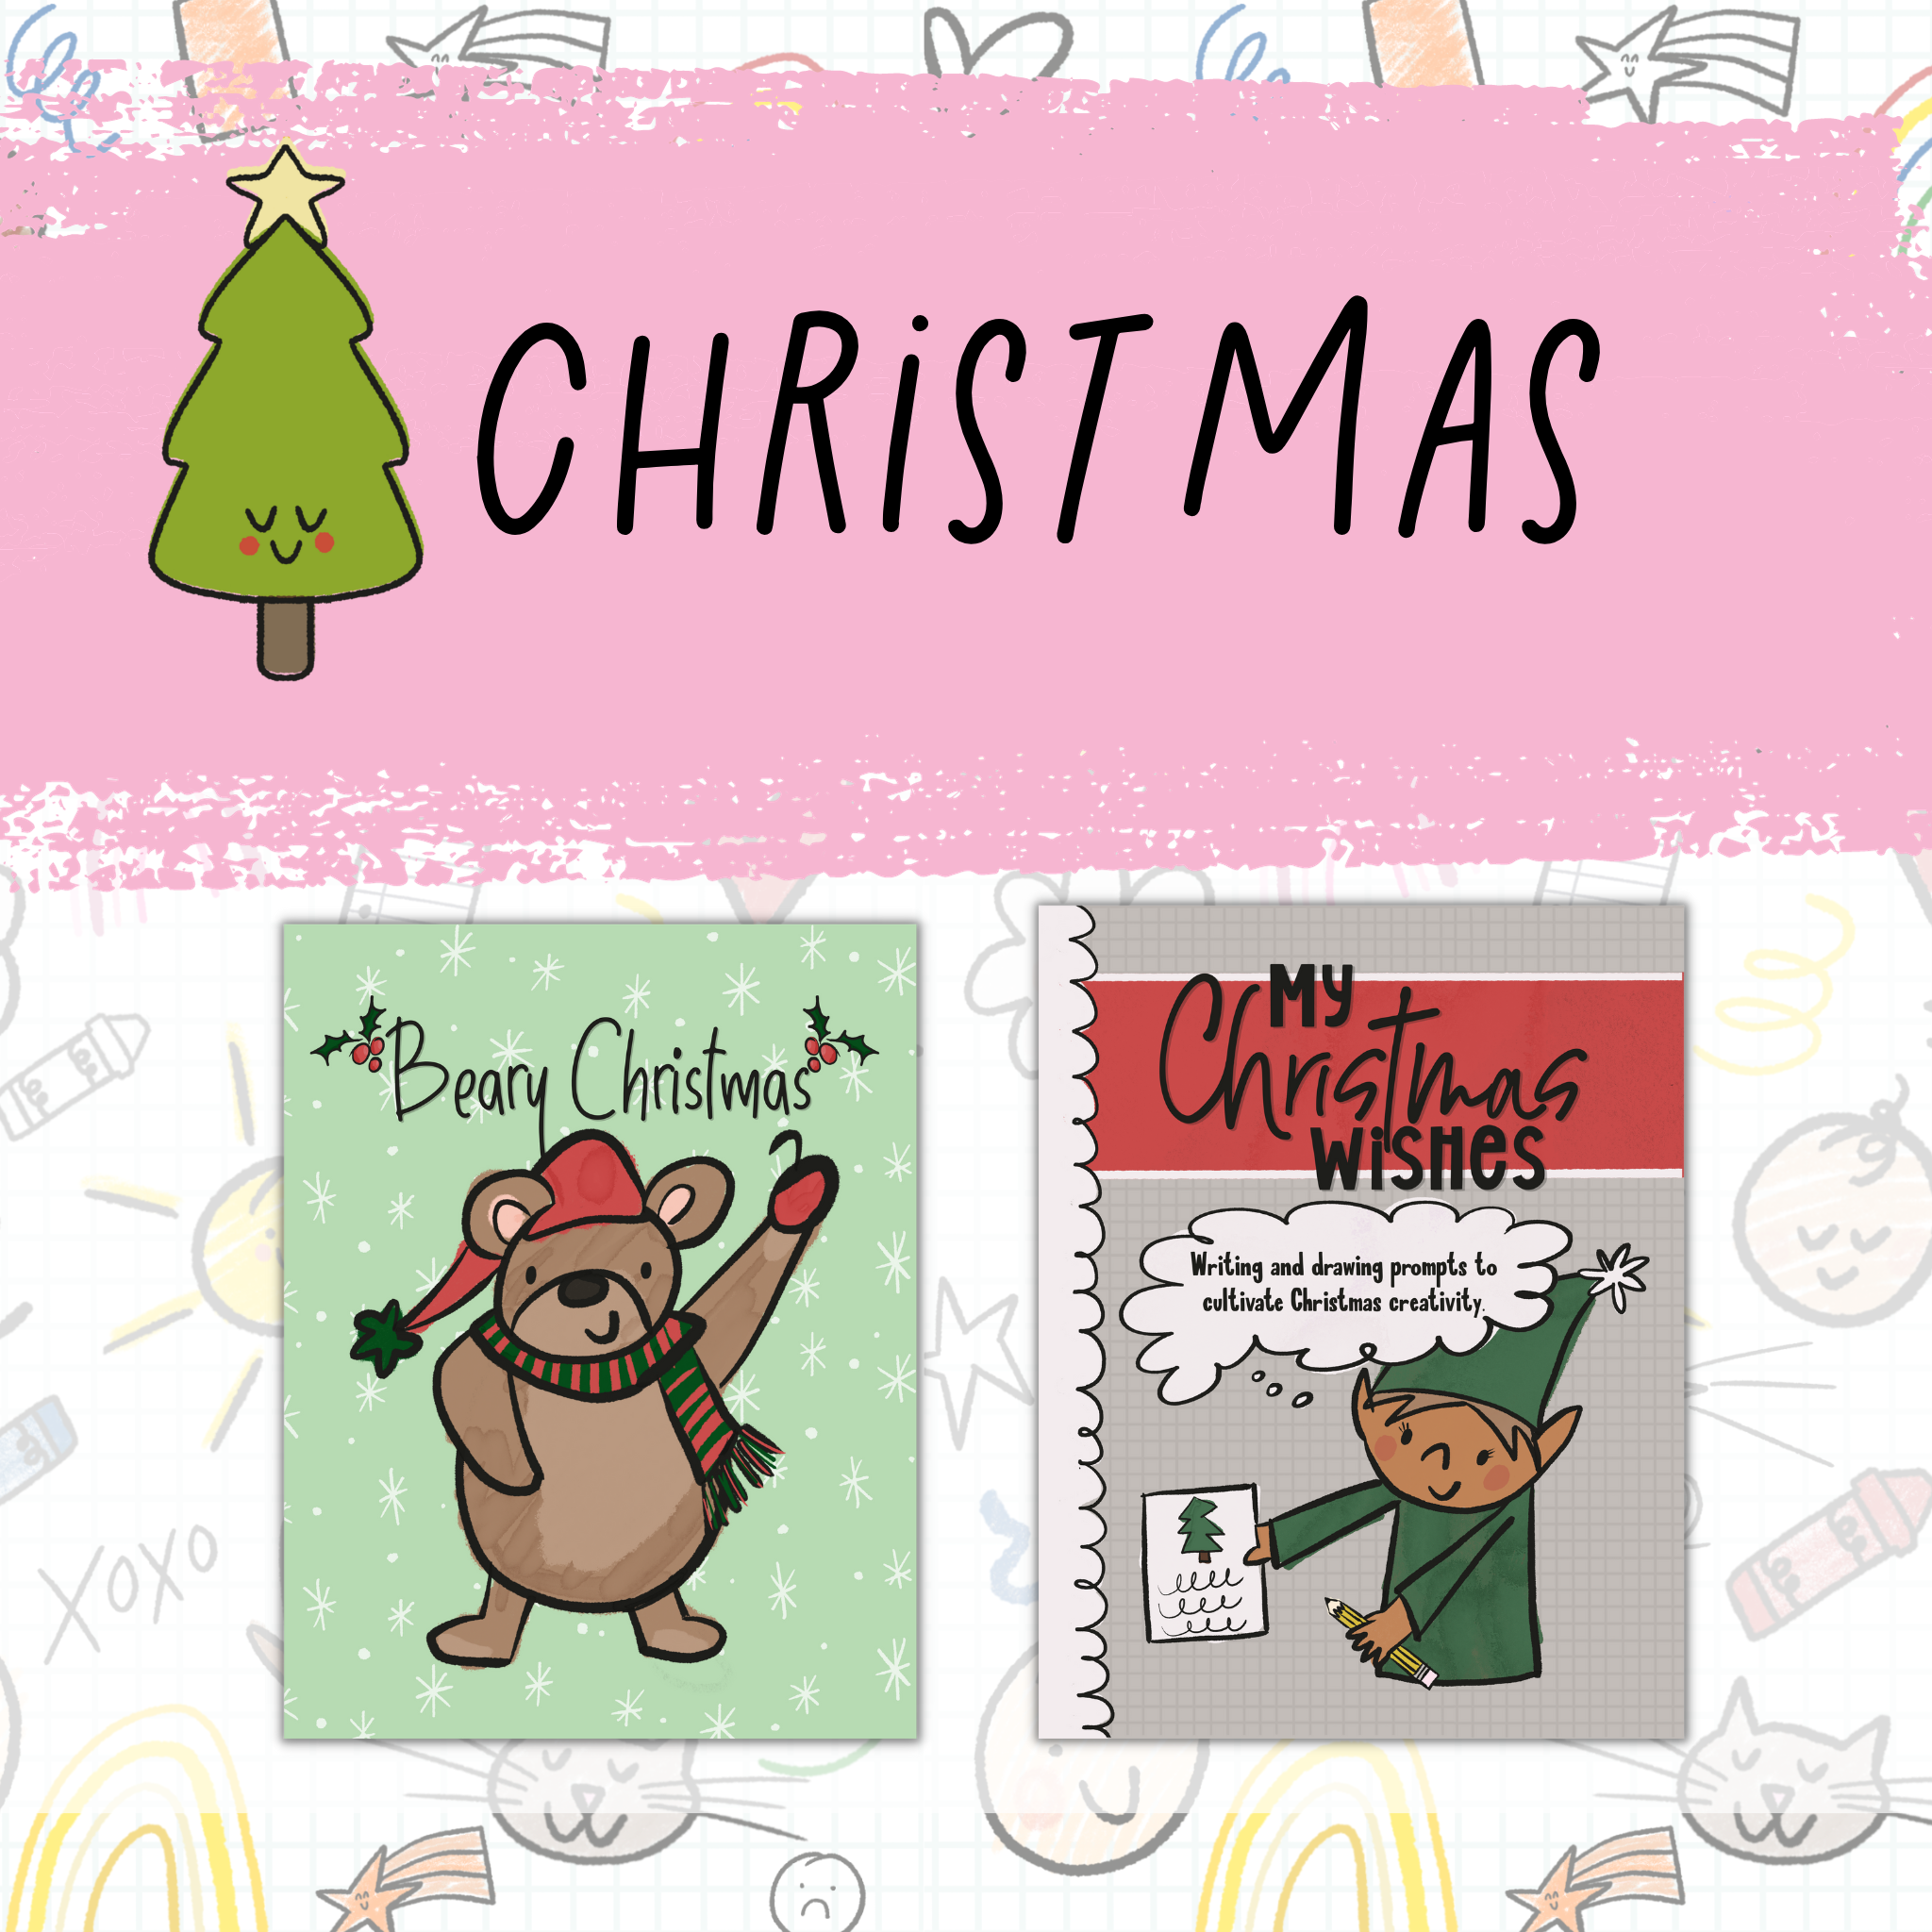 o	Button representing a variety Christmas items including workbooks, journals and sketchbooks created on Kindle Direct Publishing by self published author and illustrator Lindsay Dain.